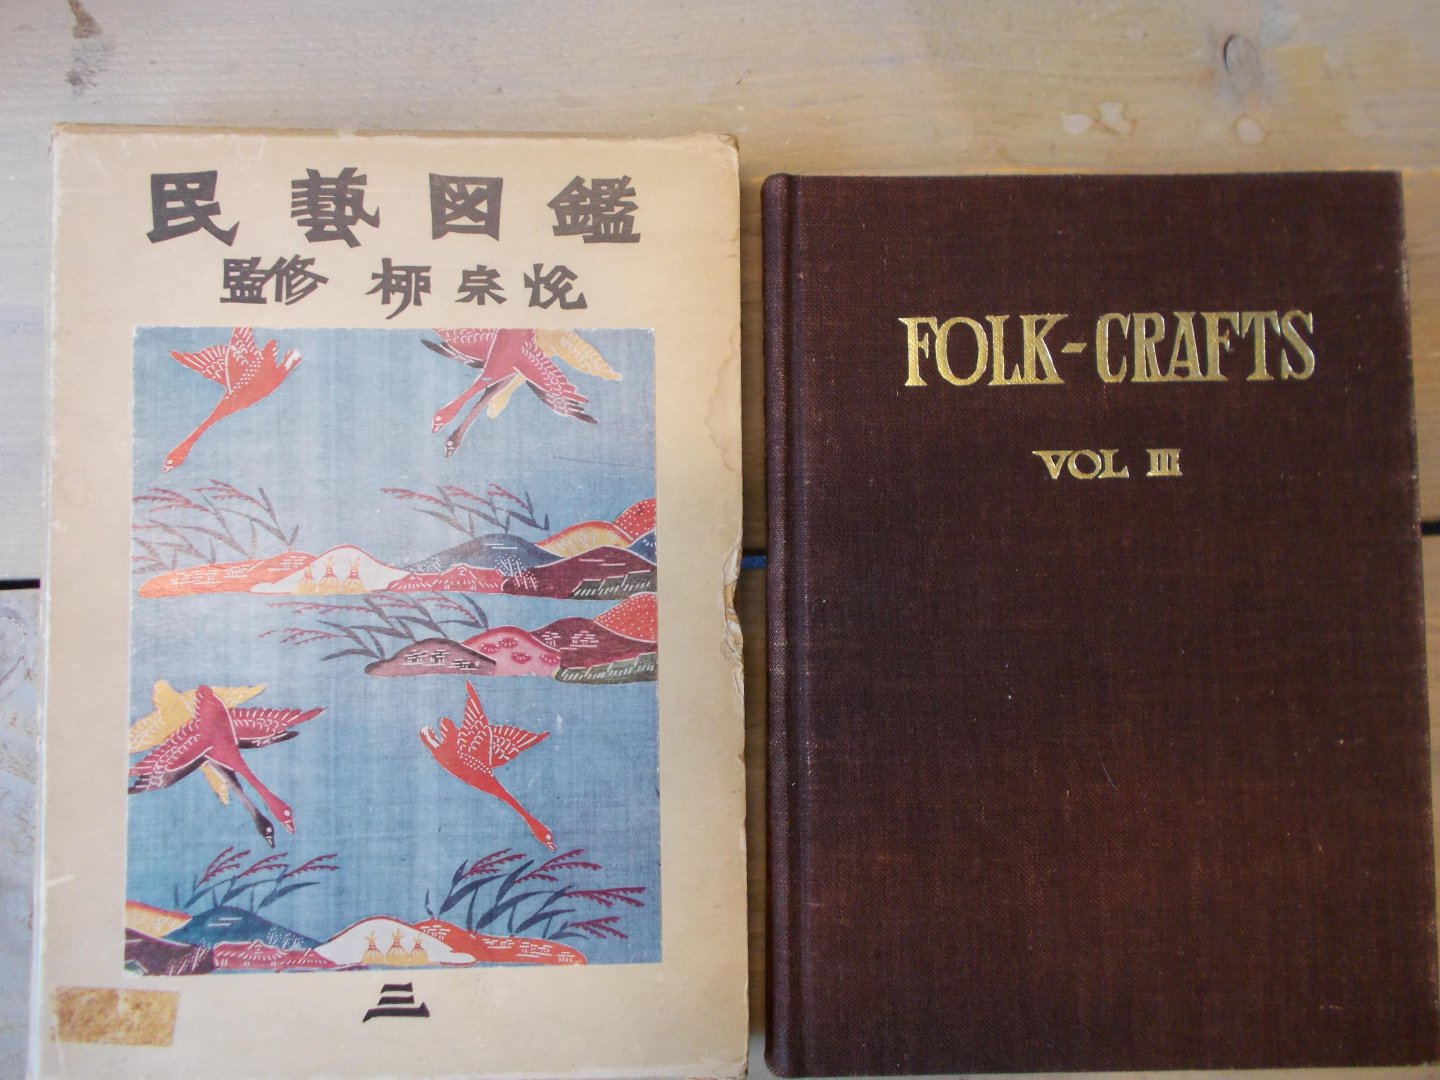 Yanagi, Soetsu - A Harvest of Folk-Crafts From the Collection of the Folk-Craft Museum. Volume III.